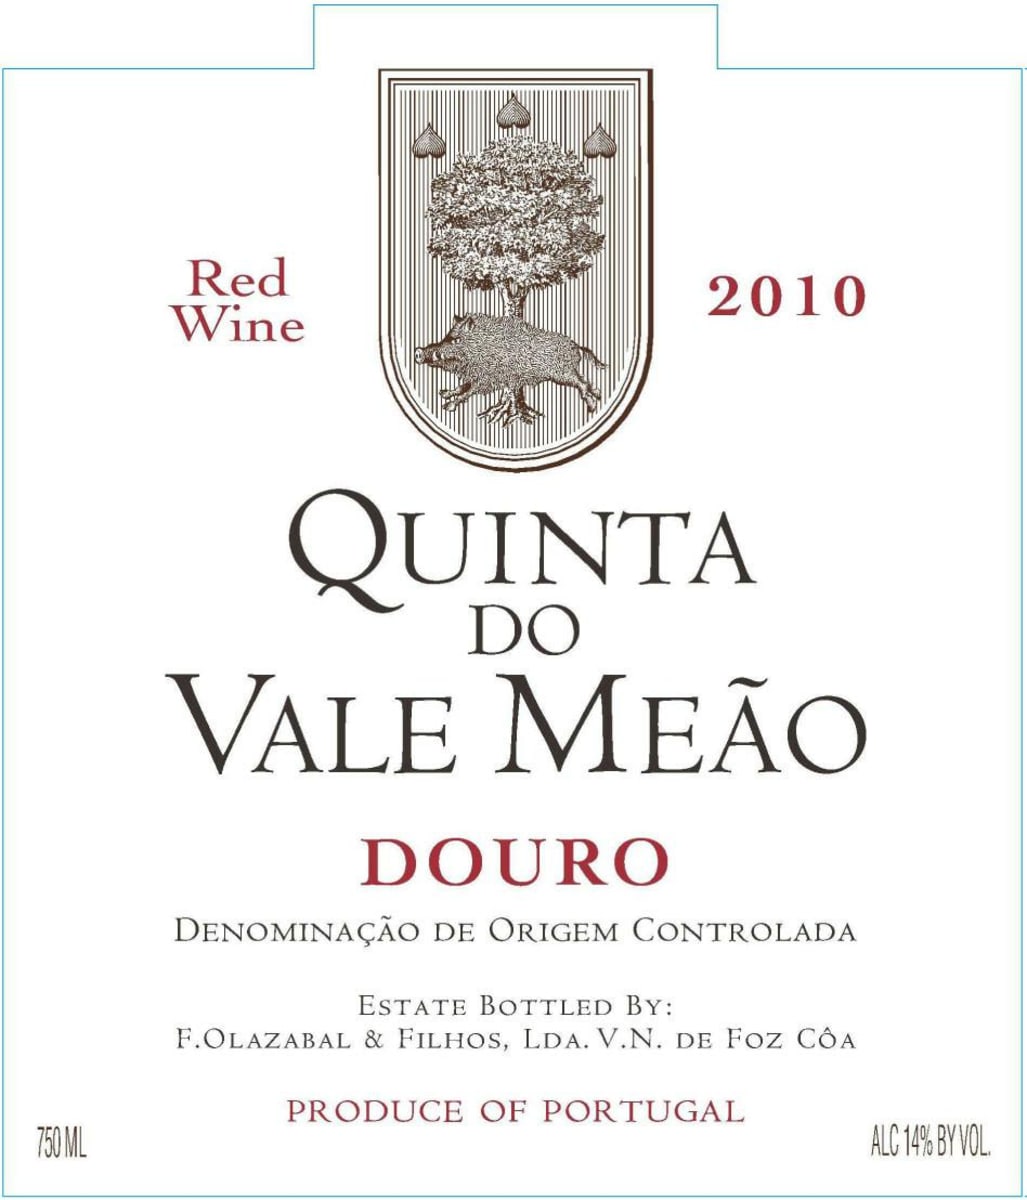 Quinta do Vale Meao Douro 2010 Front Label